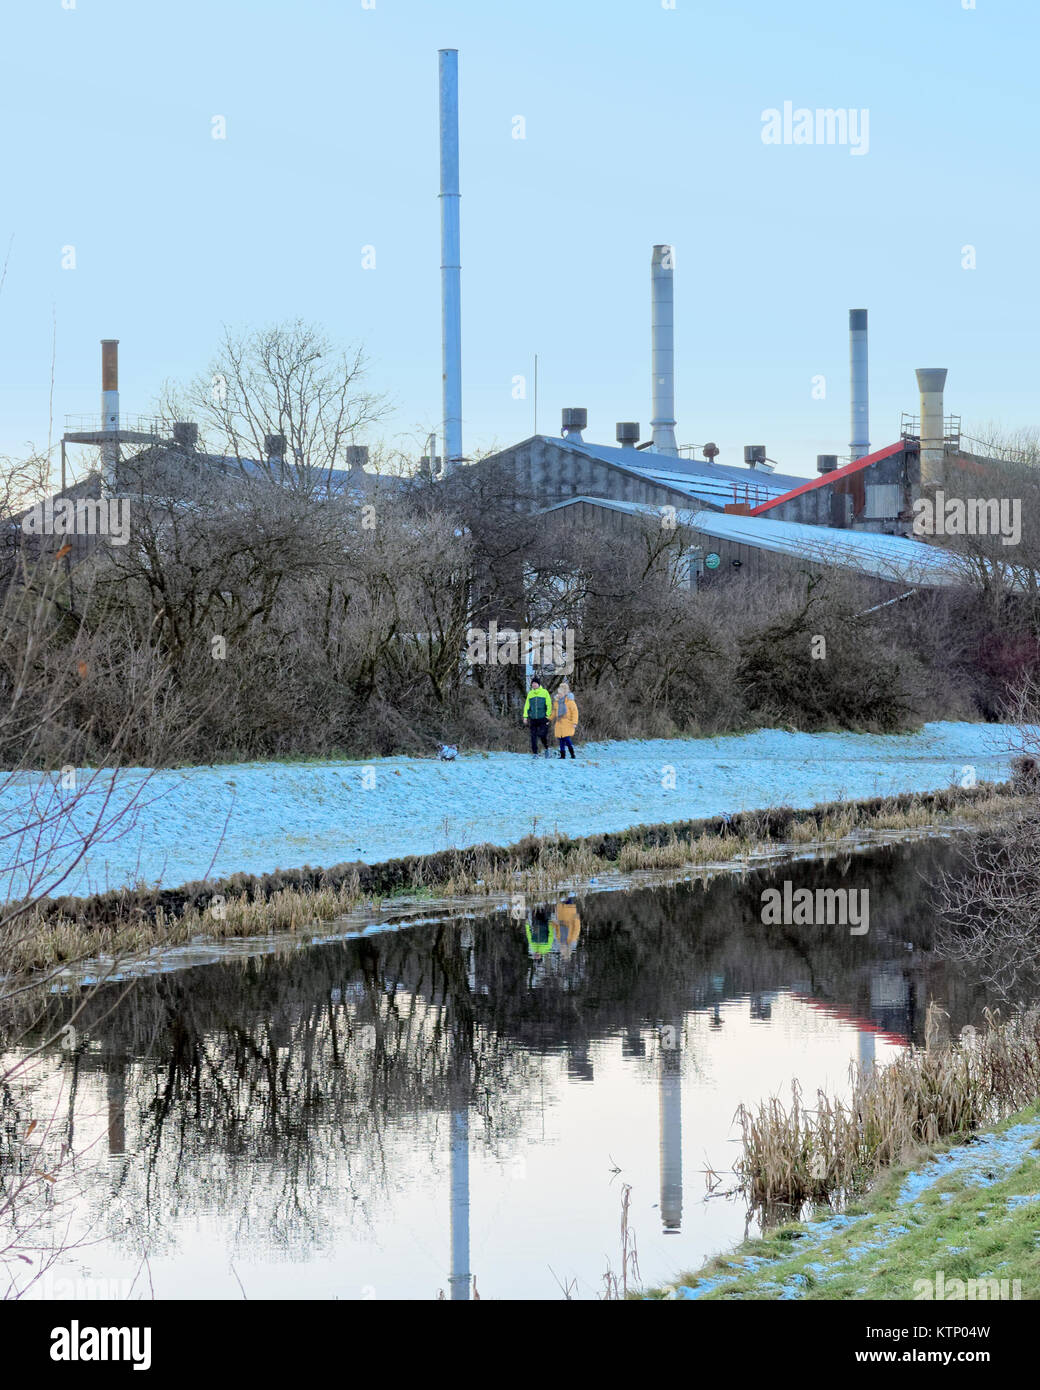 Glasgow, Scotland, UK. 28th Dec, 2017. UK Weather: Frozen towpath on the Forth and Clyde canal sees people walking home on what is expected to be the coldest night of the year. Credit: gerard ferry/Alamy Live News Stock Photo